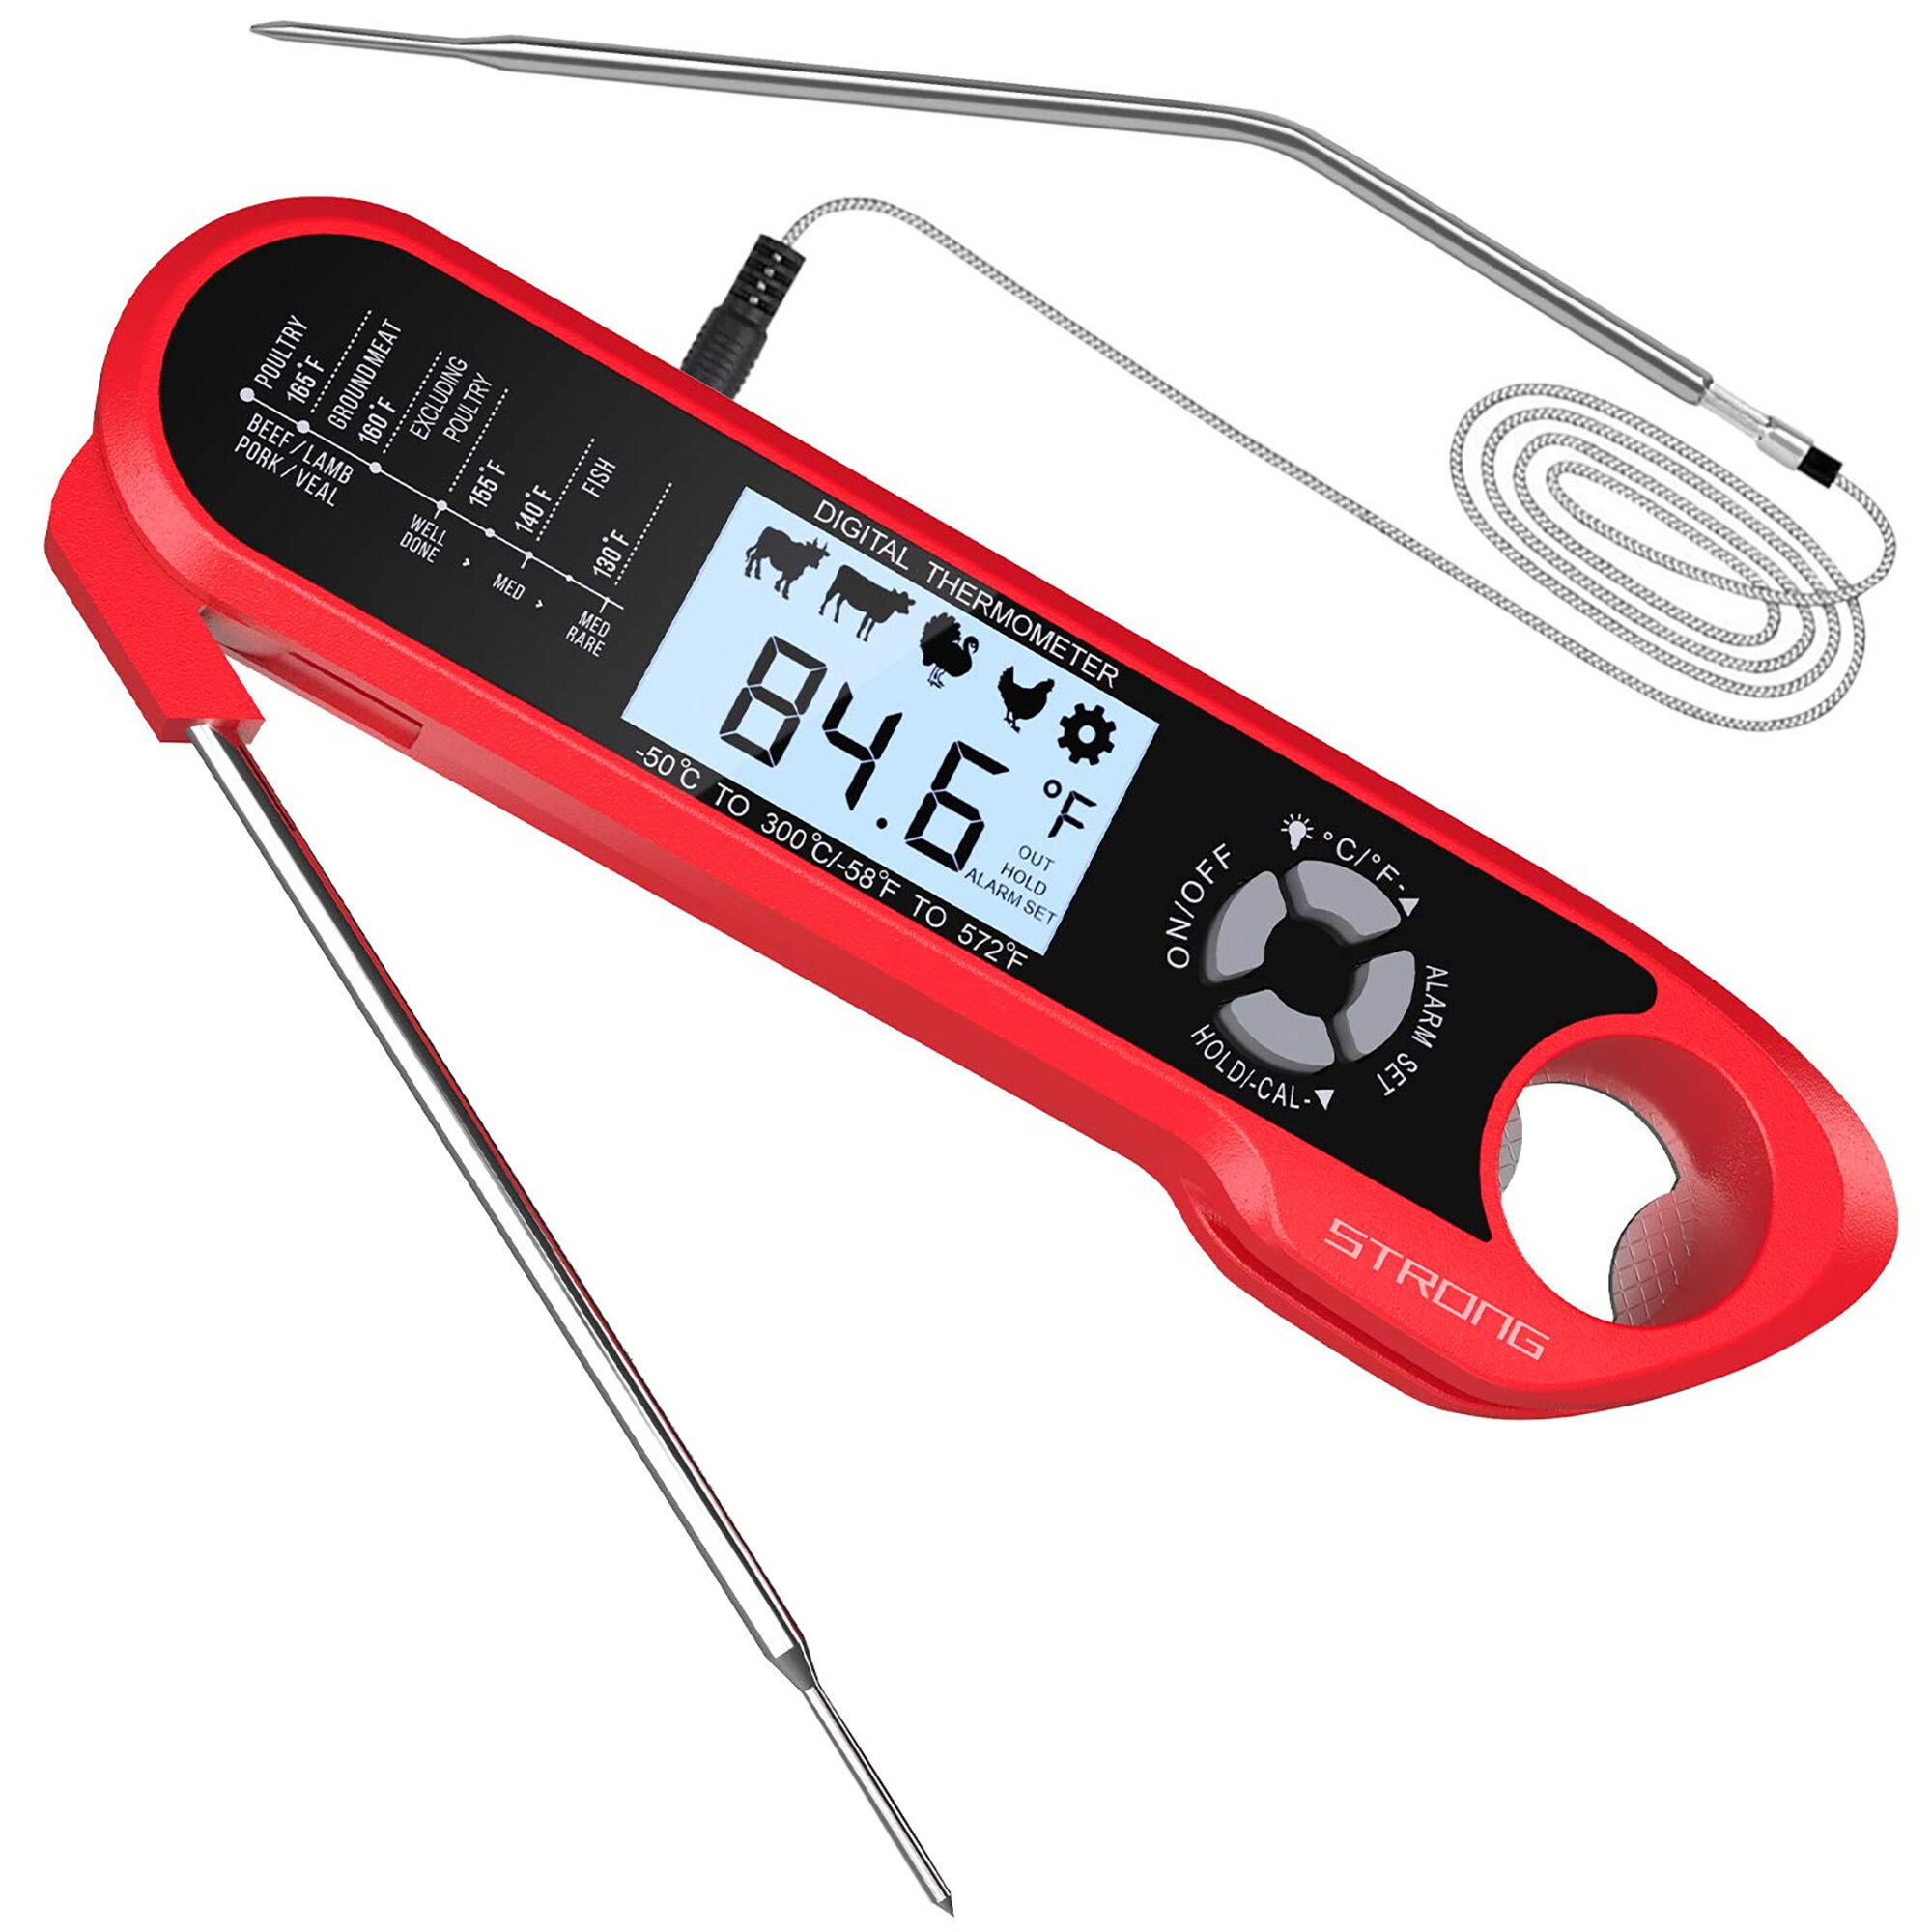 

AGSIVO Dual Probes Fast Instant Read Digital Food Meat Thermometer Waterproof For BBQ Kitchen Cooking Grilling